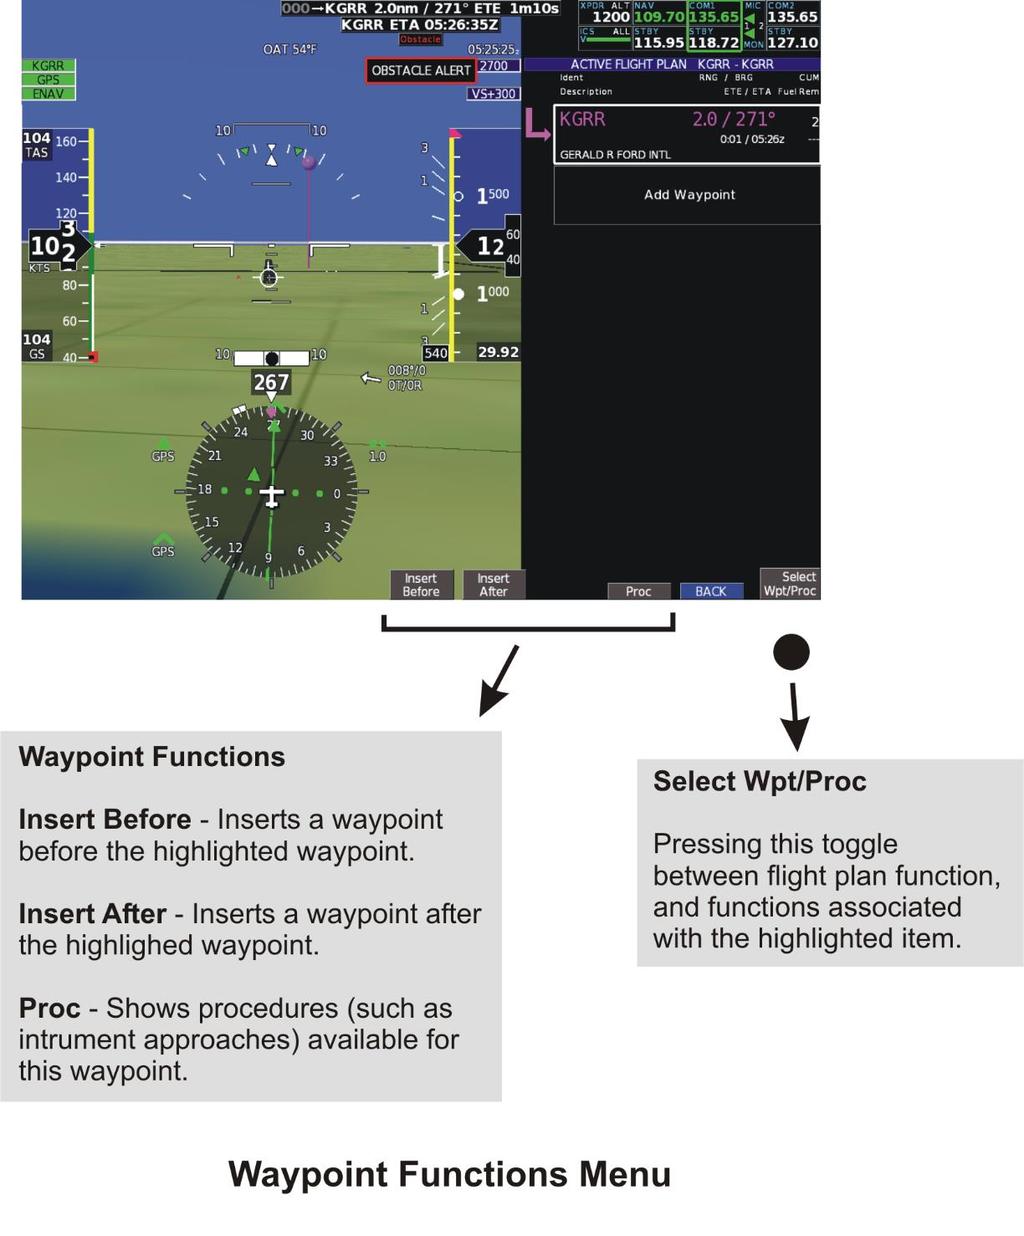 waypoints functions menu includes the option to insert a waypoint before or after this waypoint or select an instrument approach procedure (if available) for that airport.